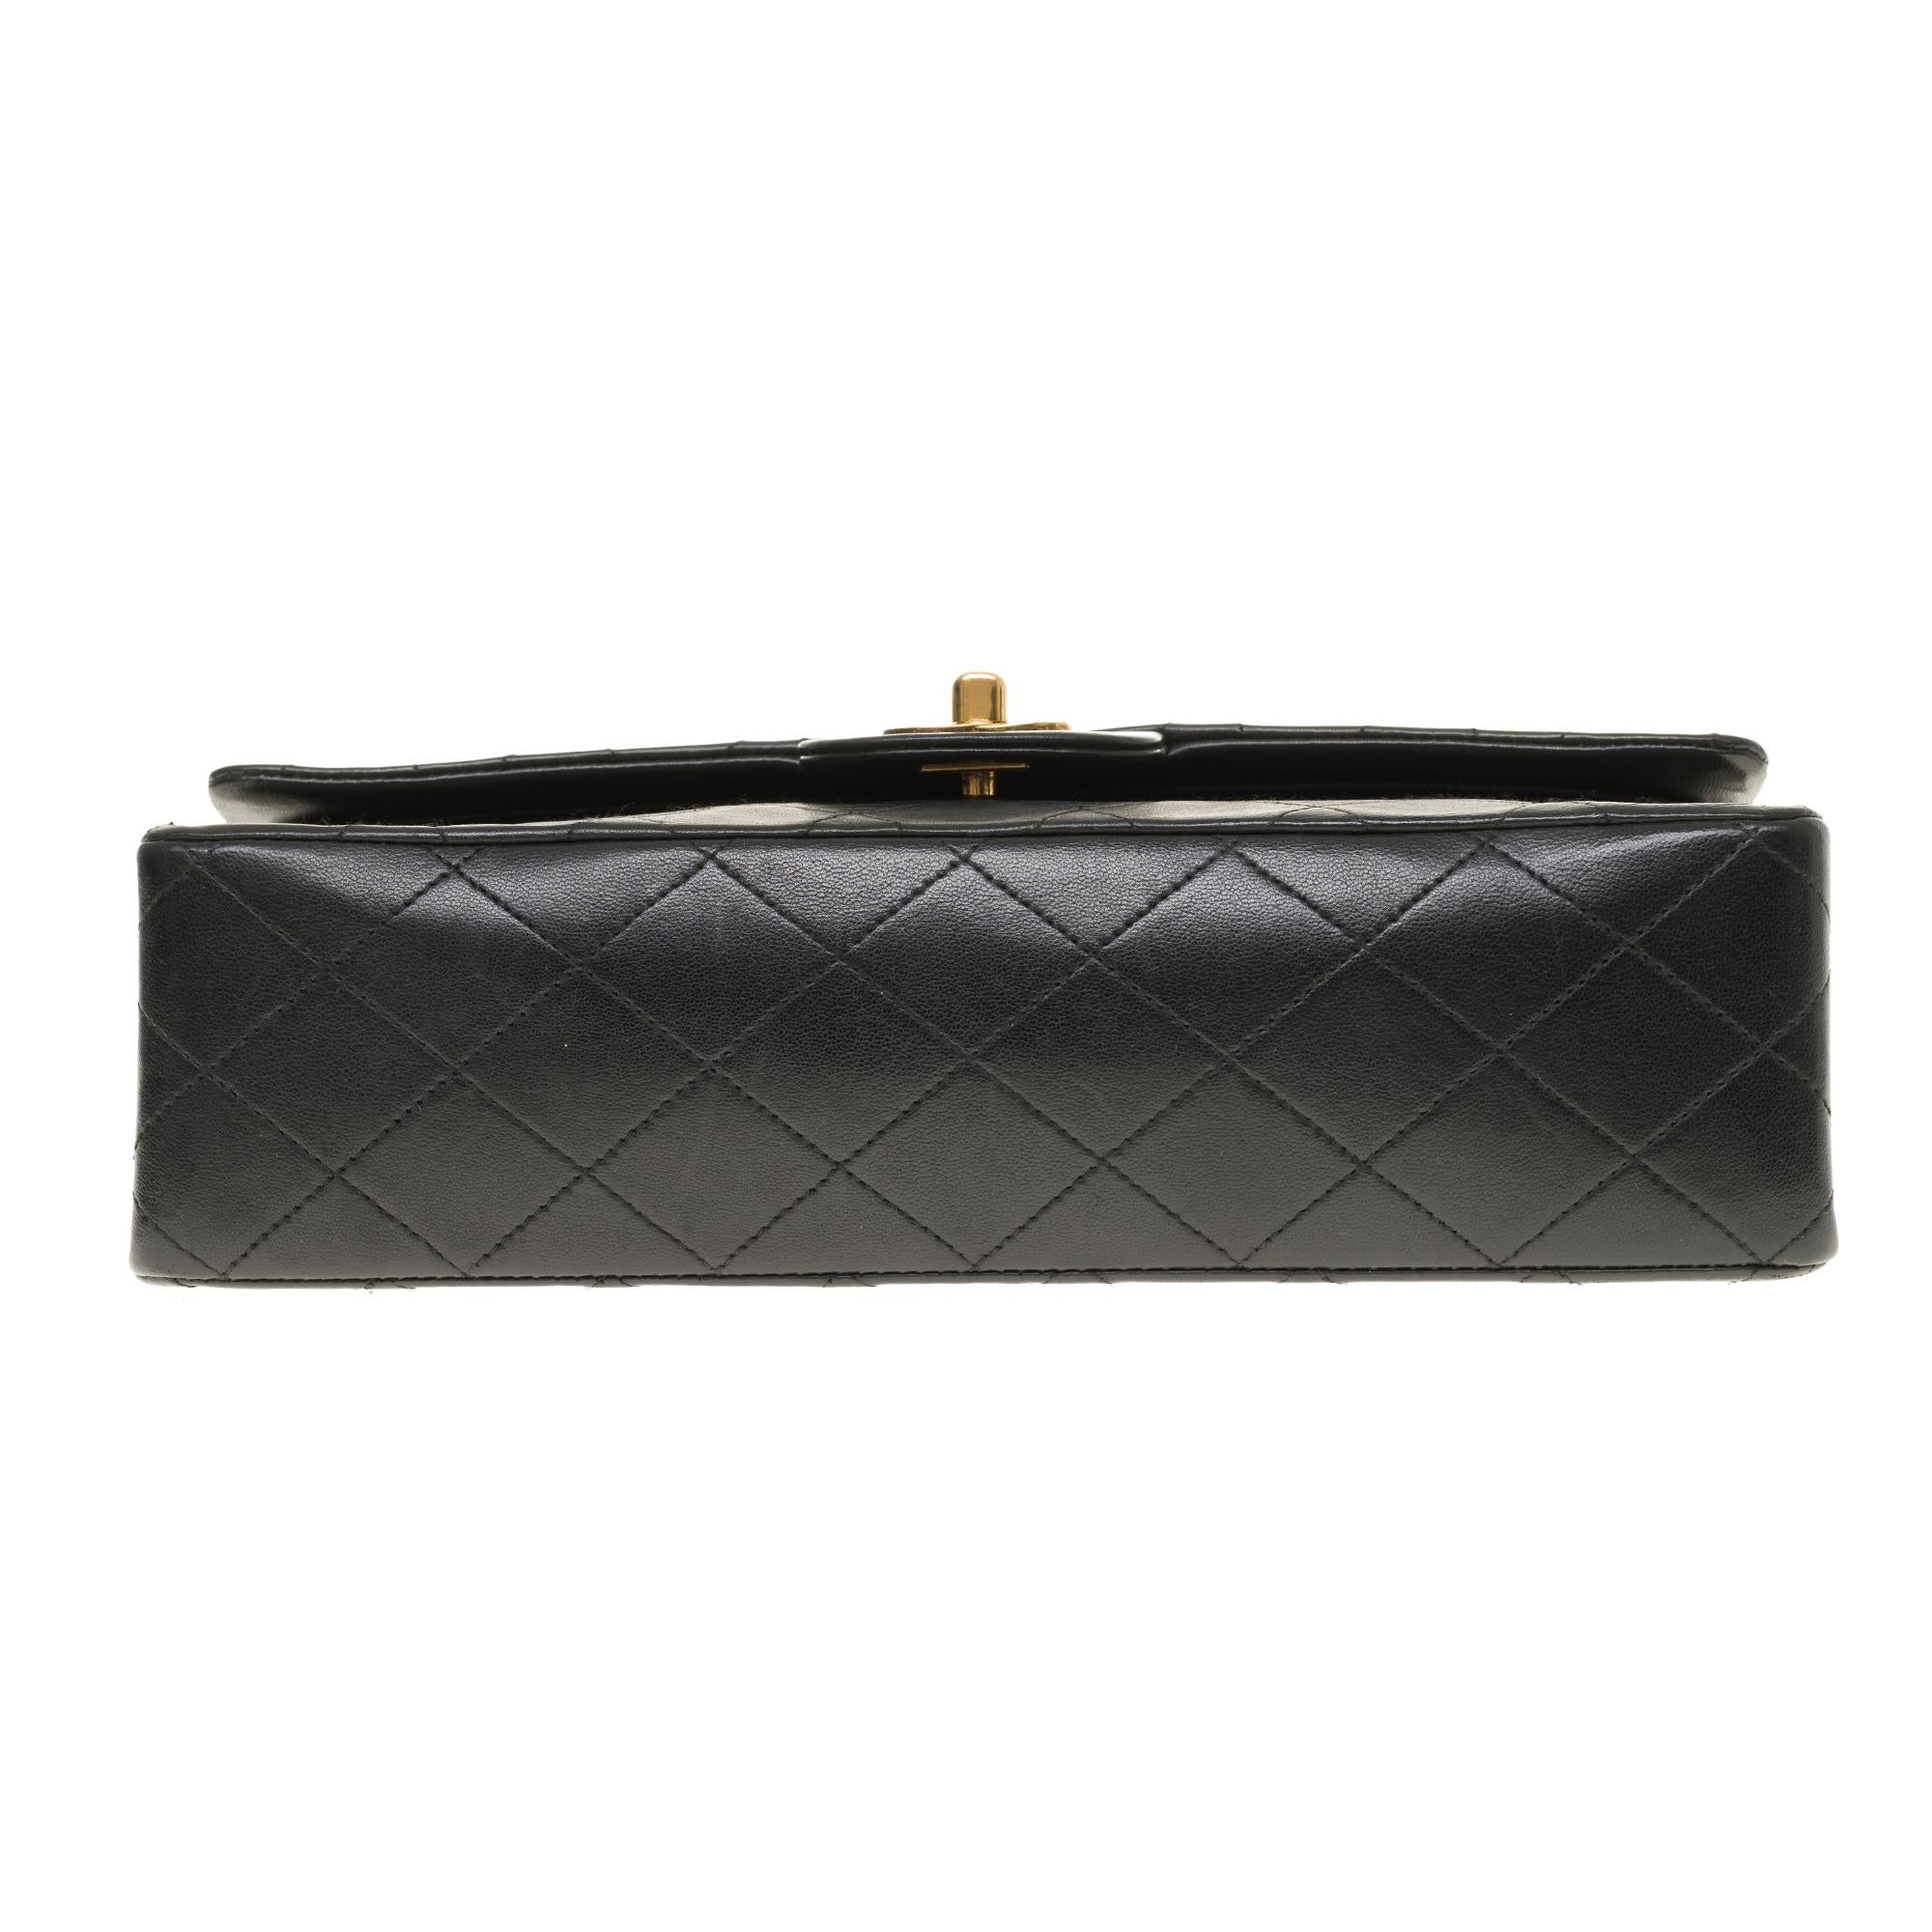 The Classy Chanel Timeless Medium Shoulder bag in black quilted lambskin and GHW 4